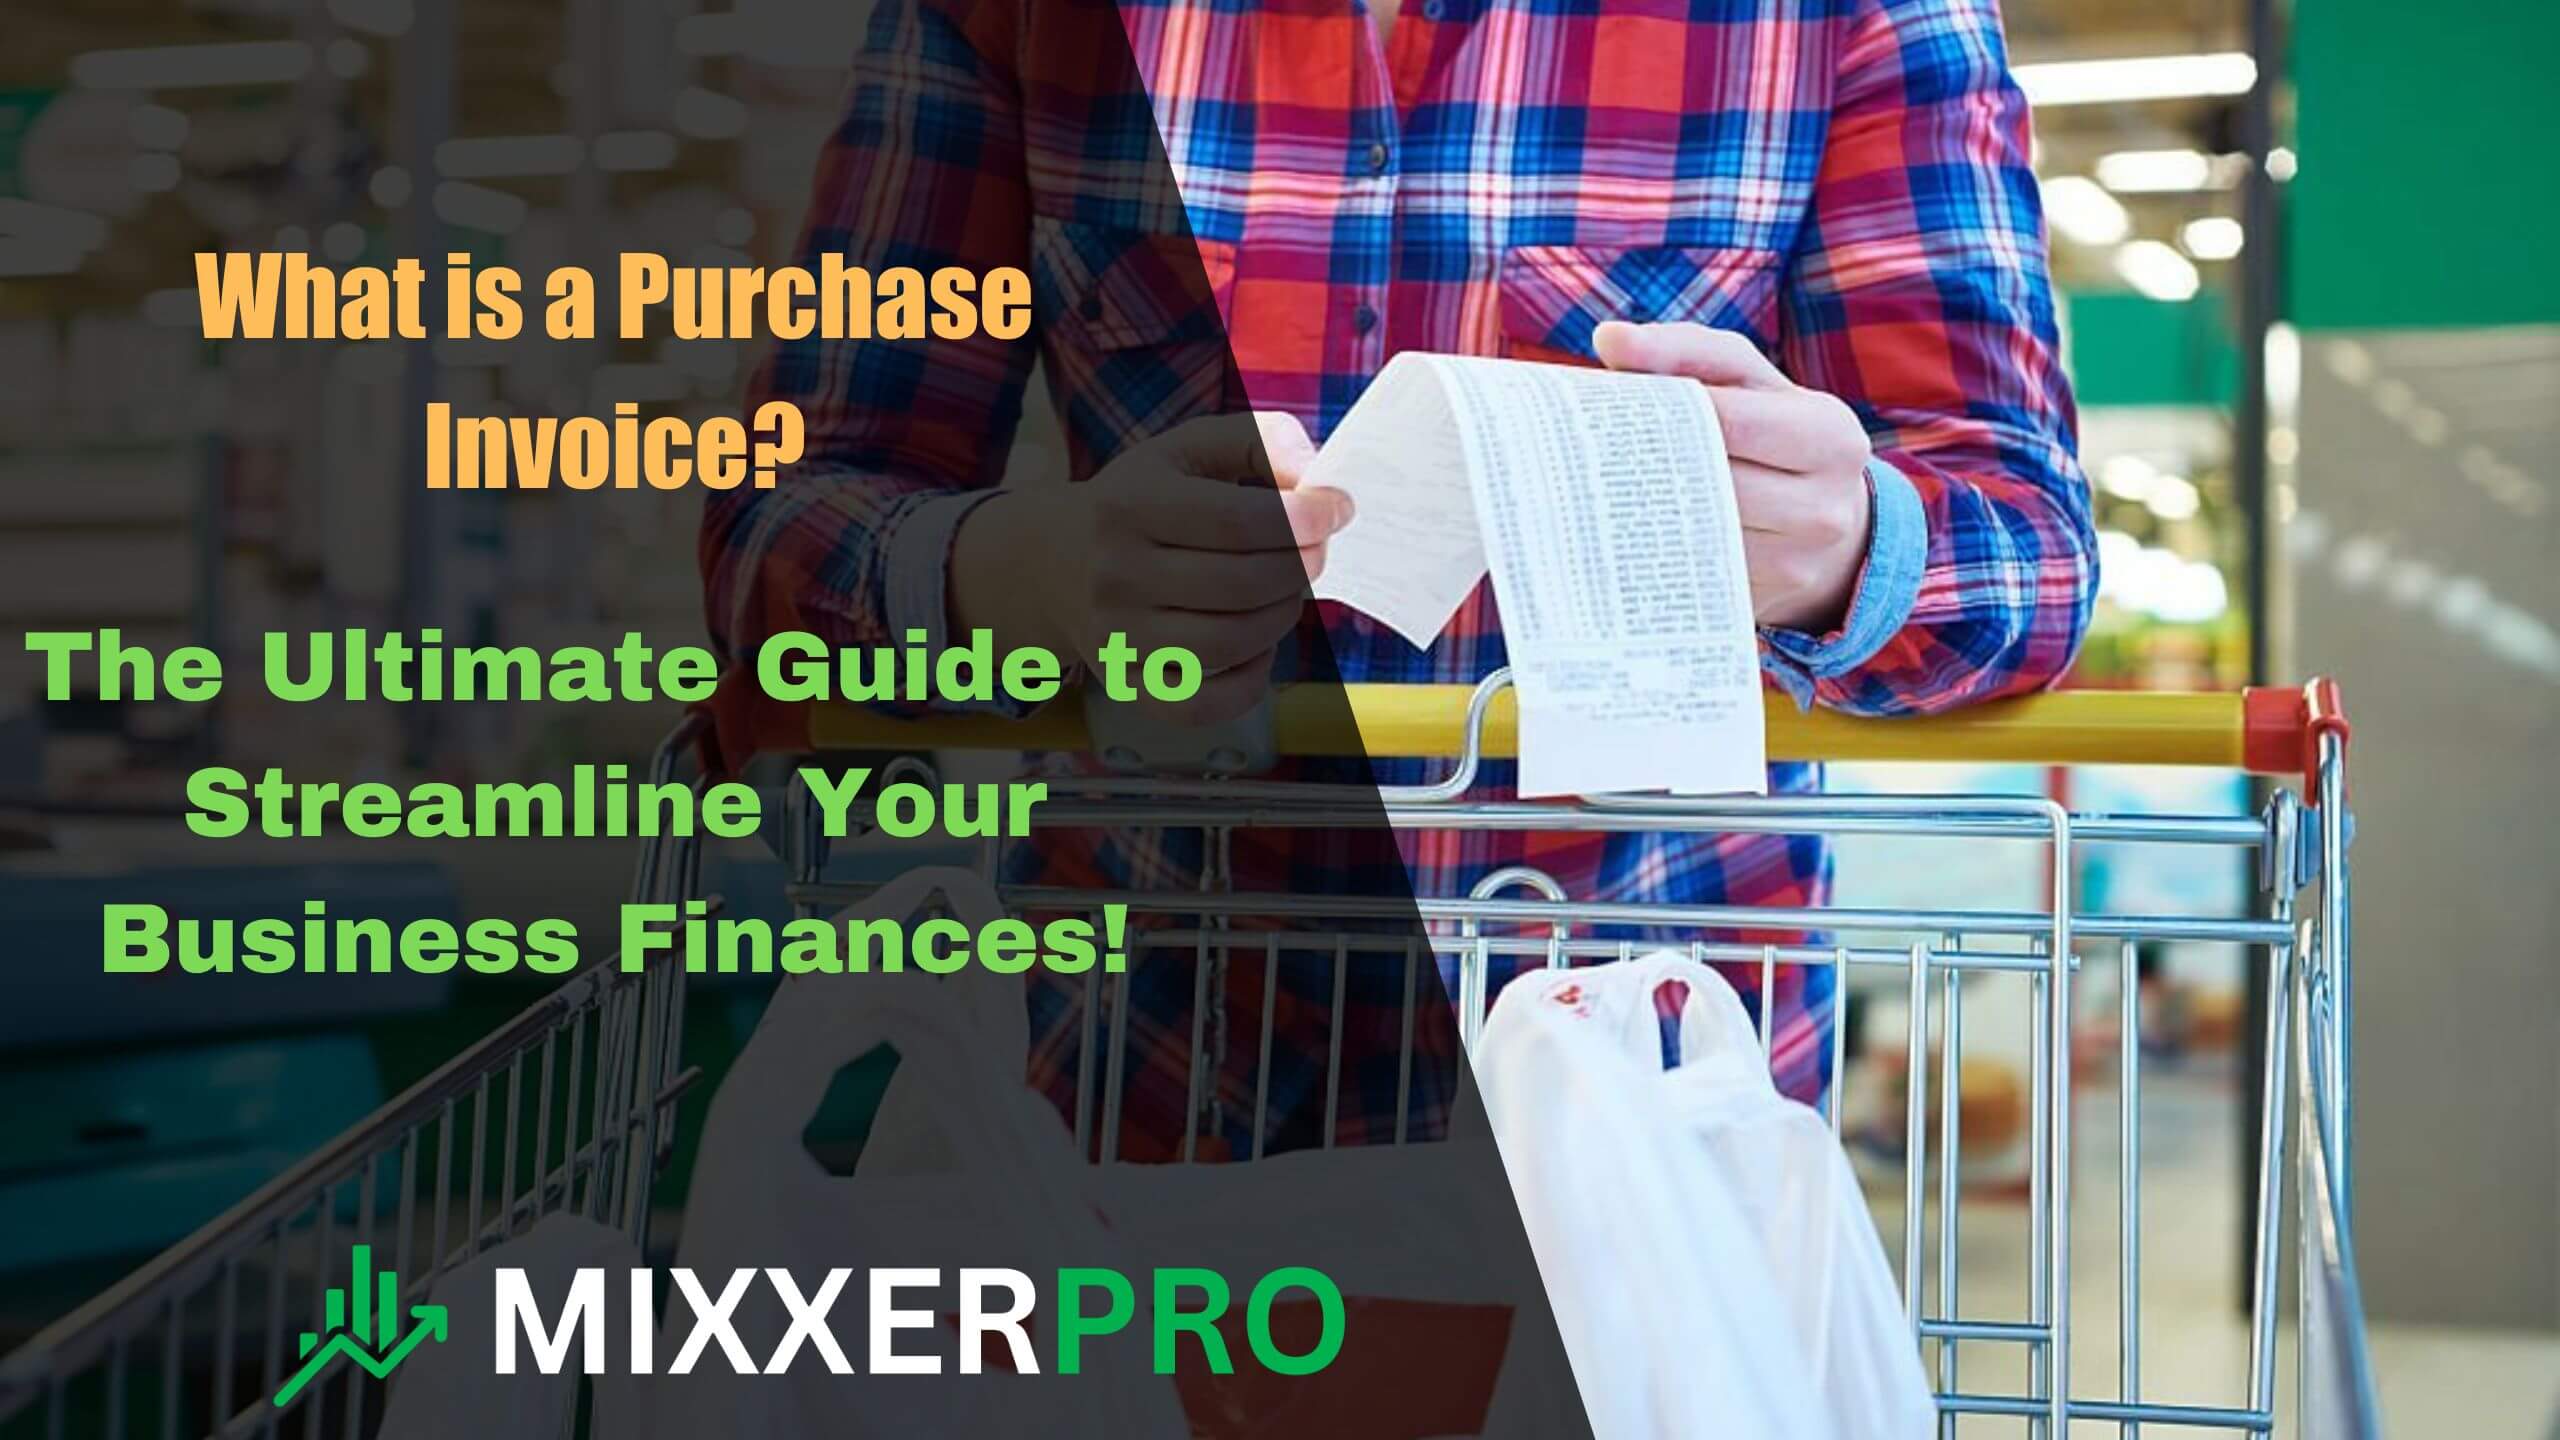 You are currently viewing What is a Purchase Invoice? The Ultimate Guide to Streamline Your Business Finances!